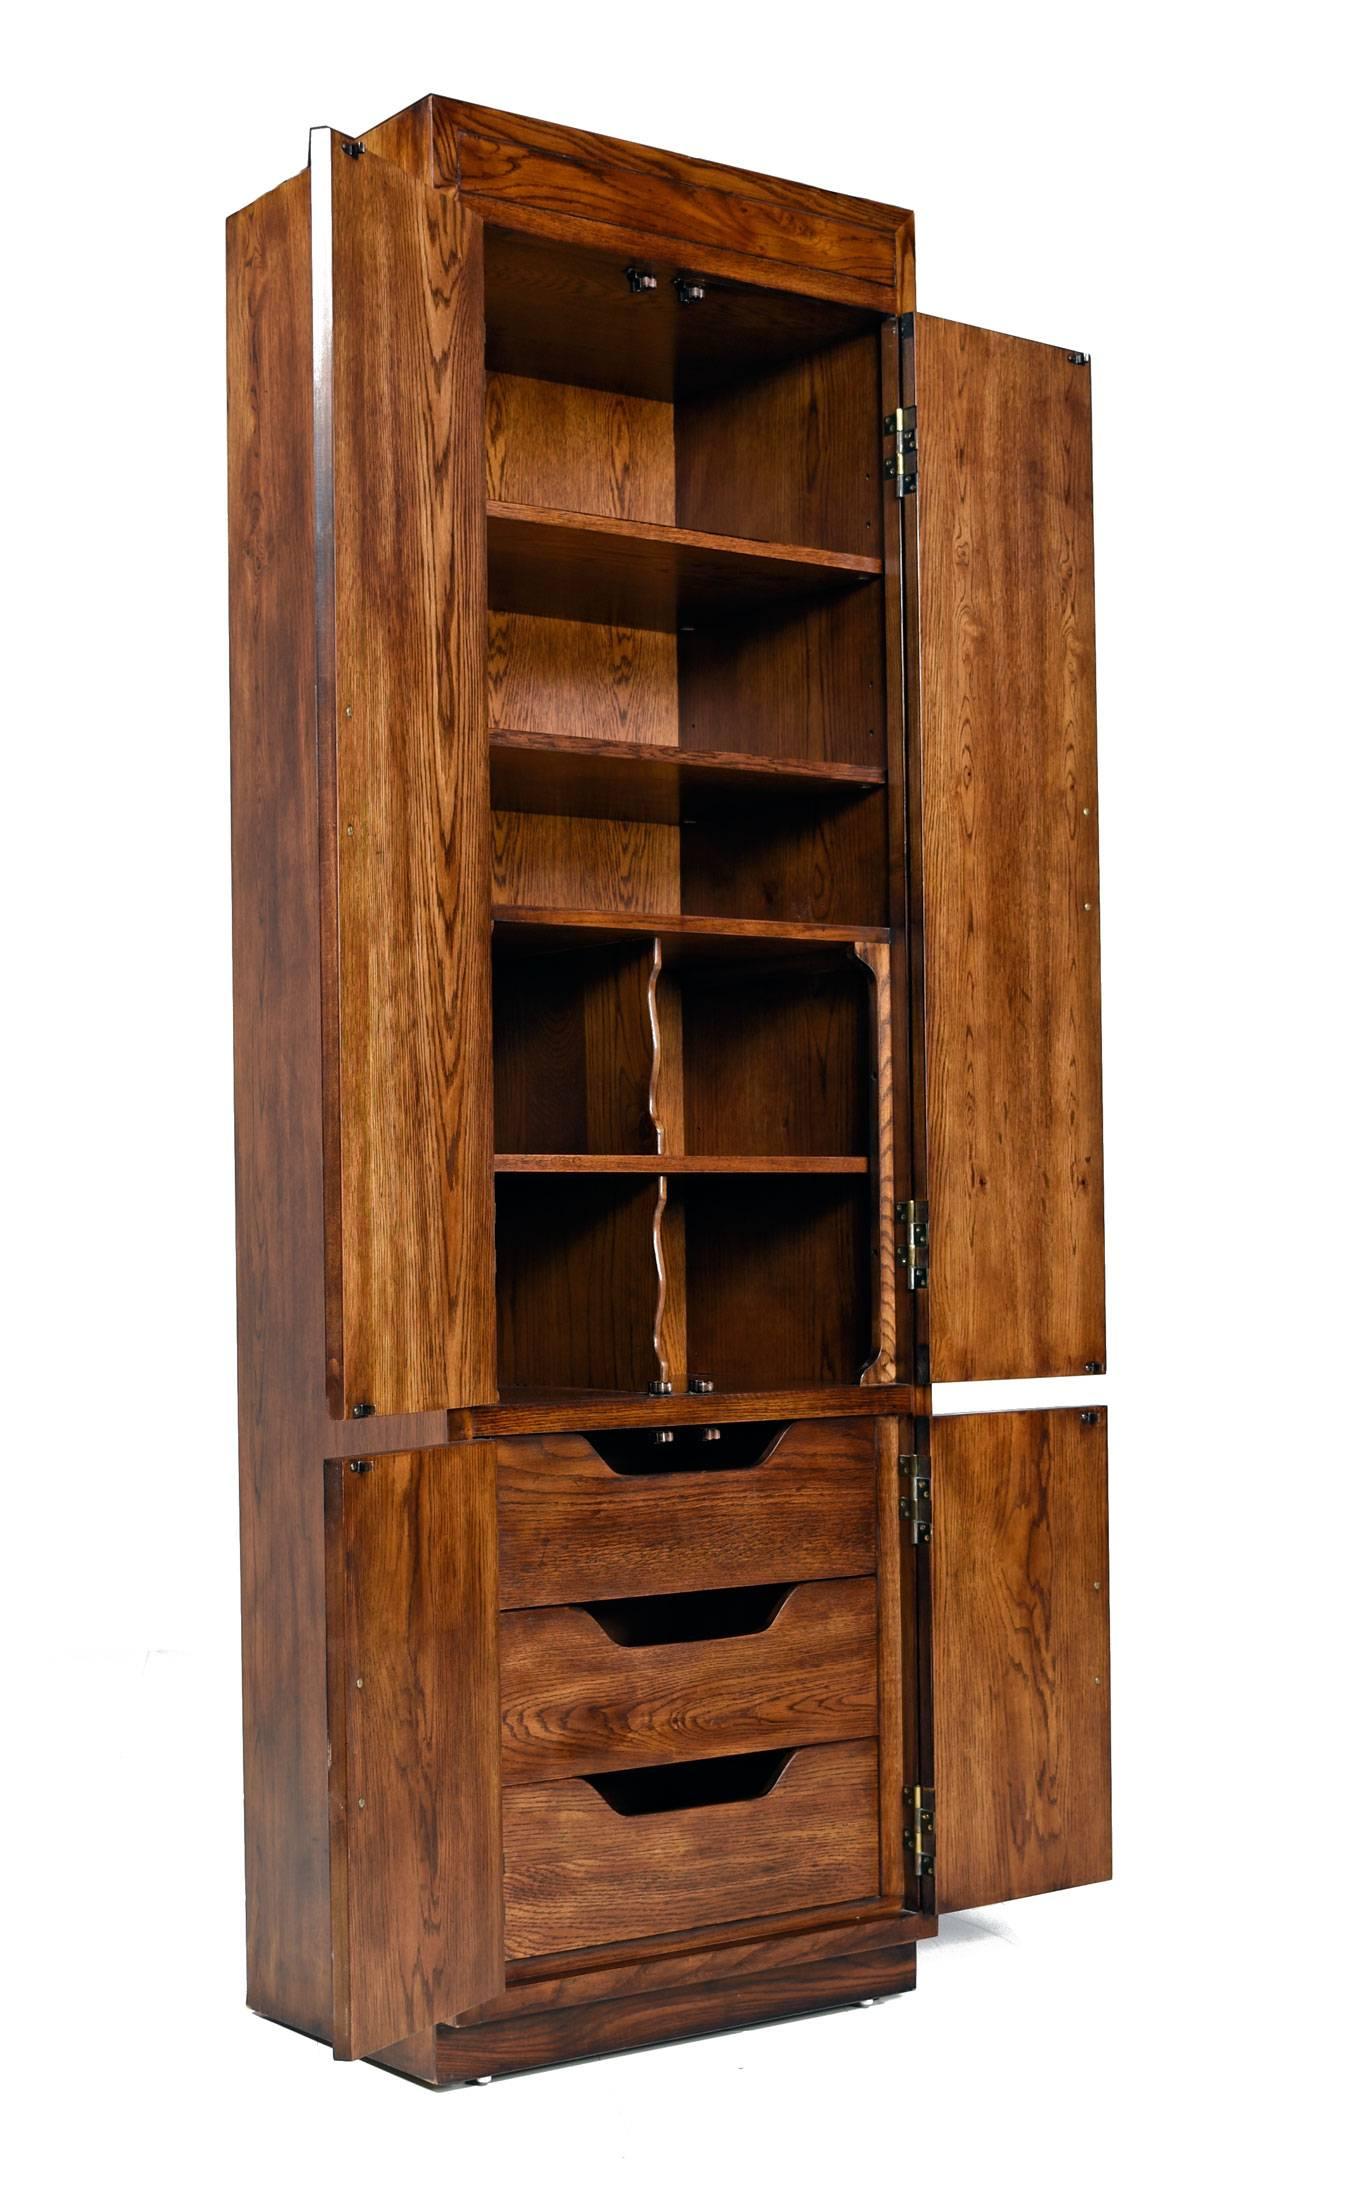 Vintage 1970s chifferobes by esteemed American manufacturer, Henredon. Handsome Campaign style pecan cabinets are accented with brass hardware. 
Open the cabinets to reveal a combination of drawers, cubbies and shelves. Both open shelves and